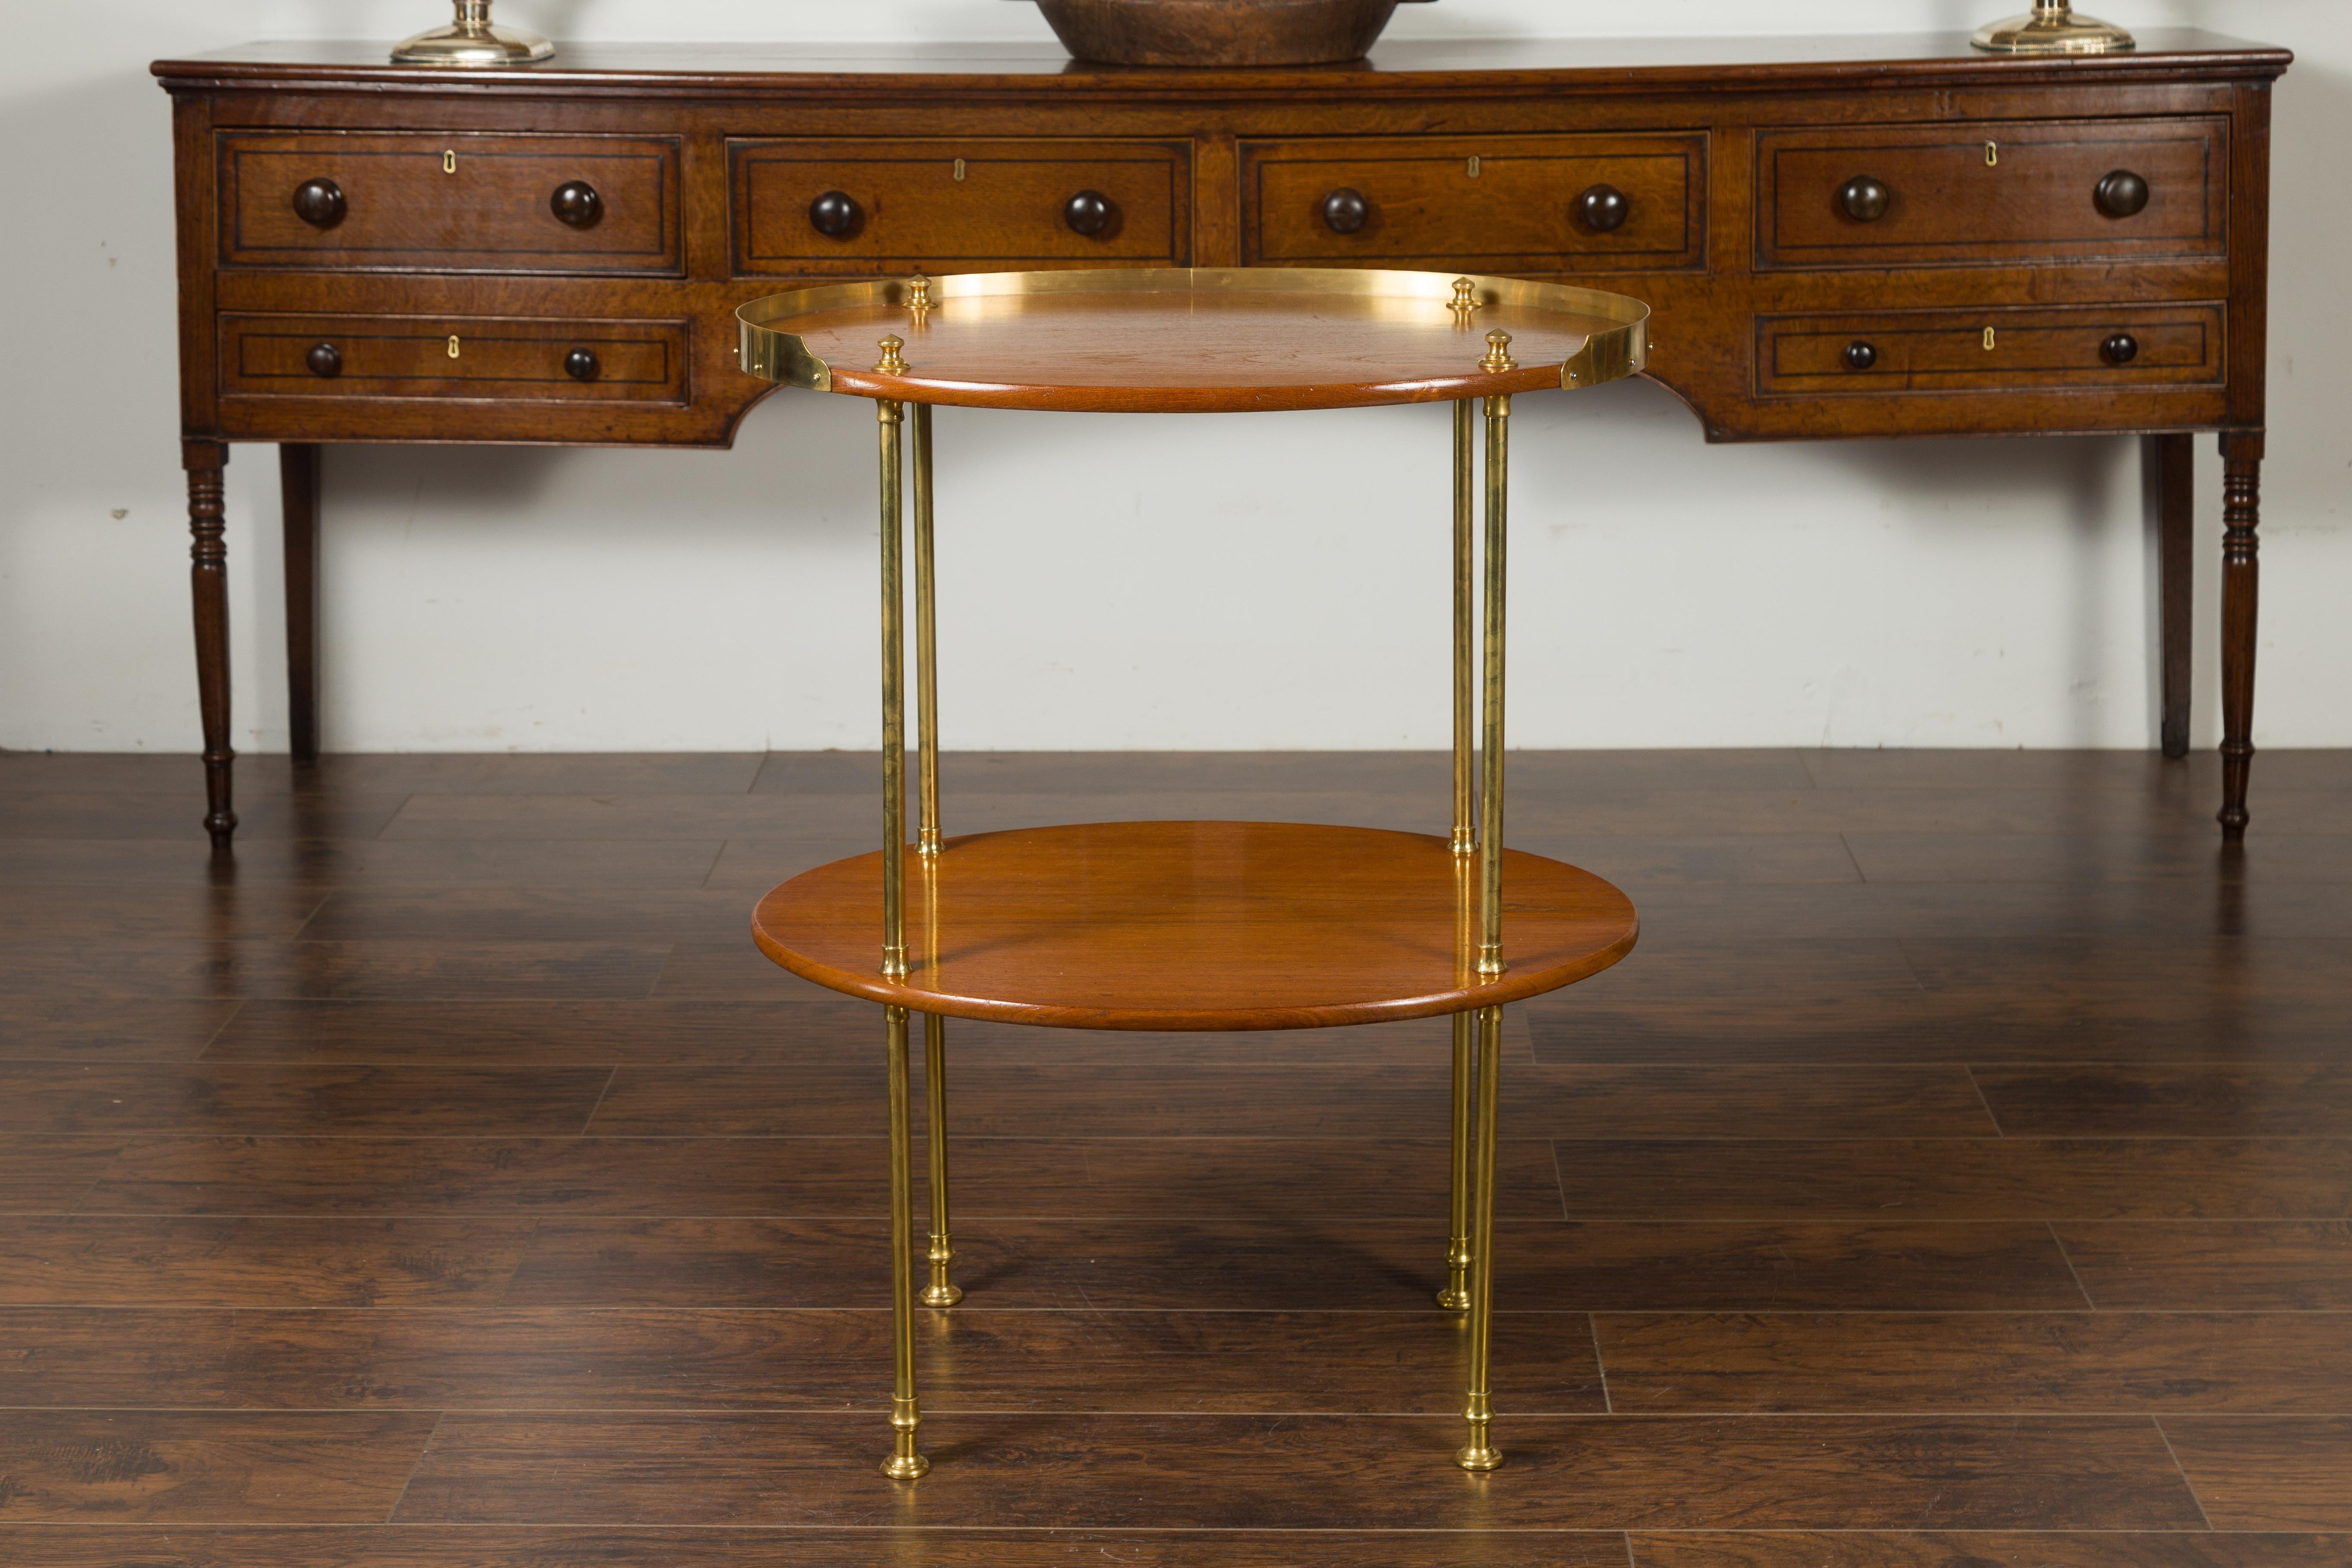 An English mahogany tiered oval table from the mid-20th century, with brass accents. Born in England during the midcentury period, this two-tiered table features an oval top surrounded by a three-quarter brass gallery, supported by brass supports